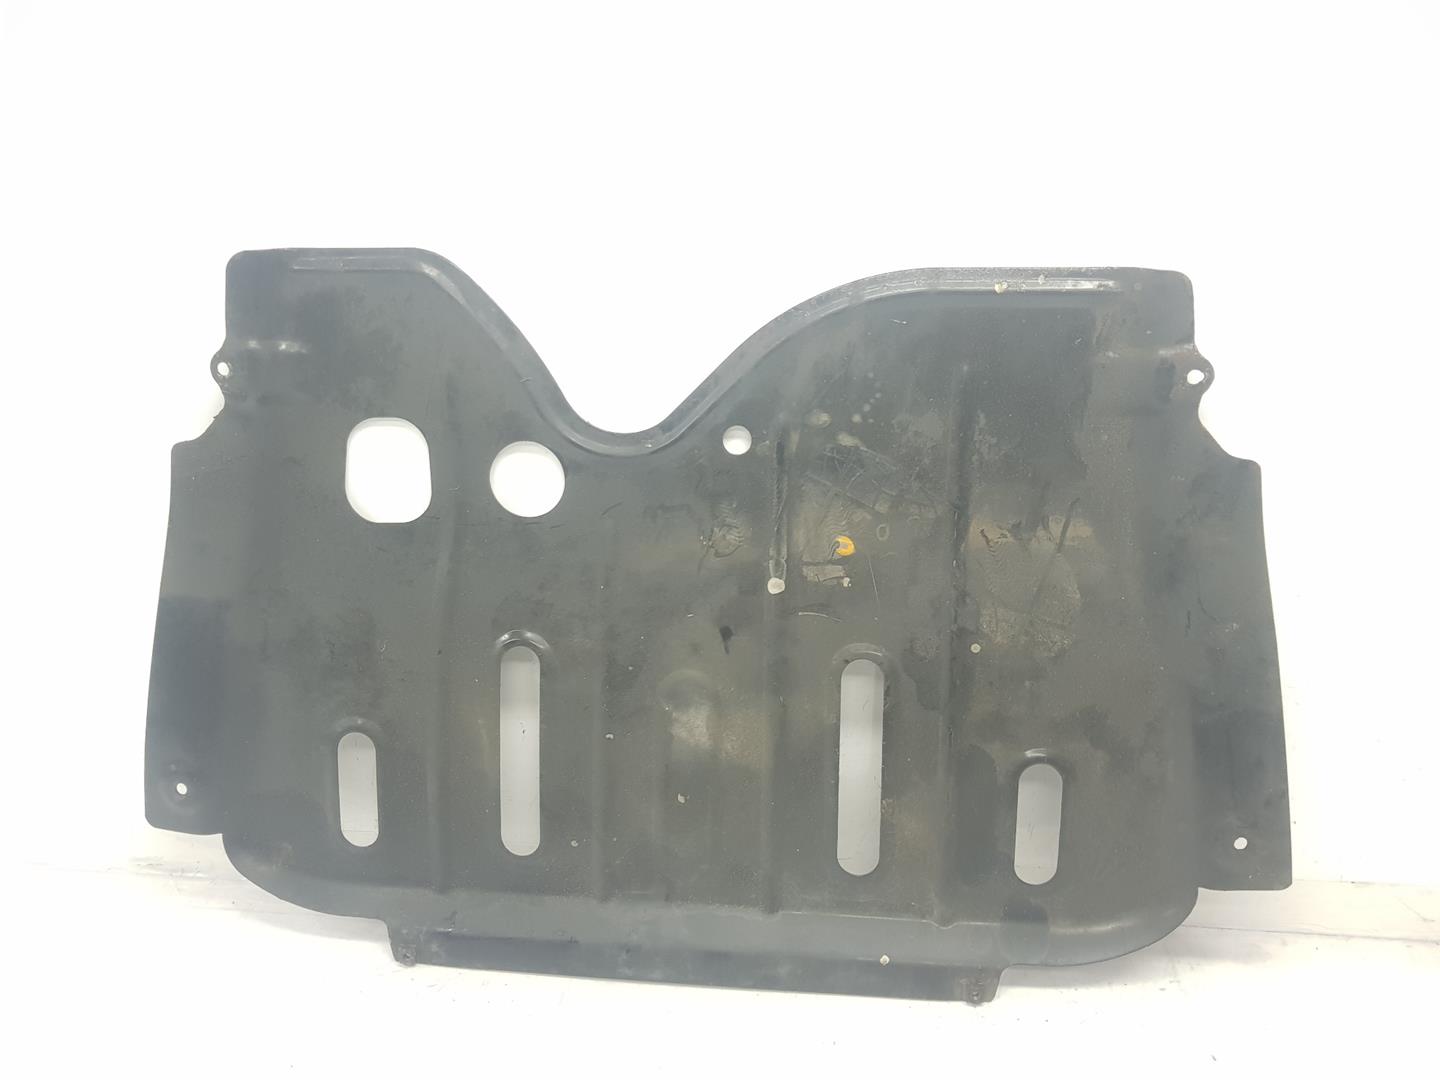 CHEVROLET Cruze 1 generation (2009-2015) Front Engine Cover 95459793, 95459793 23799233